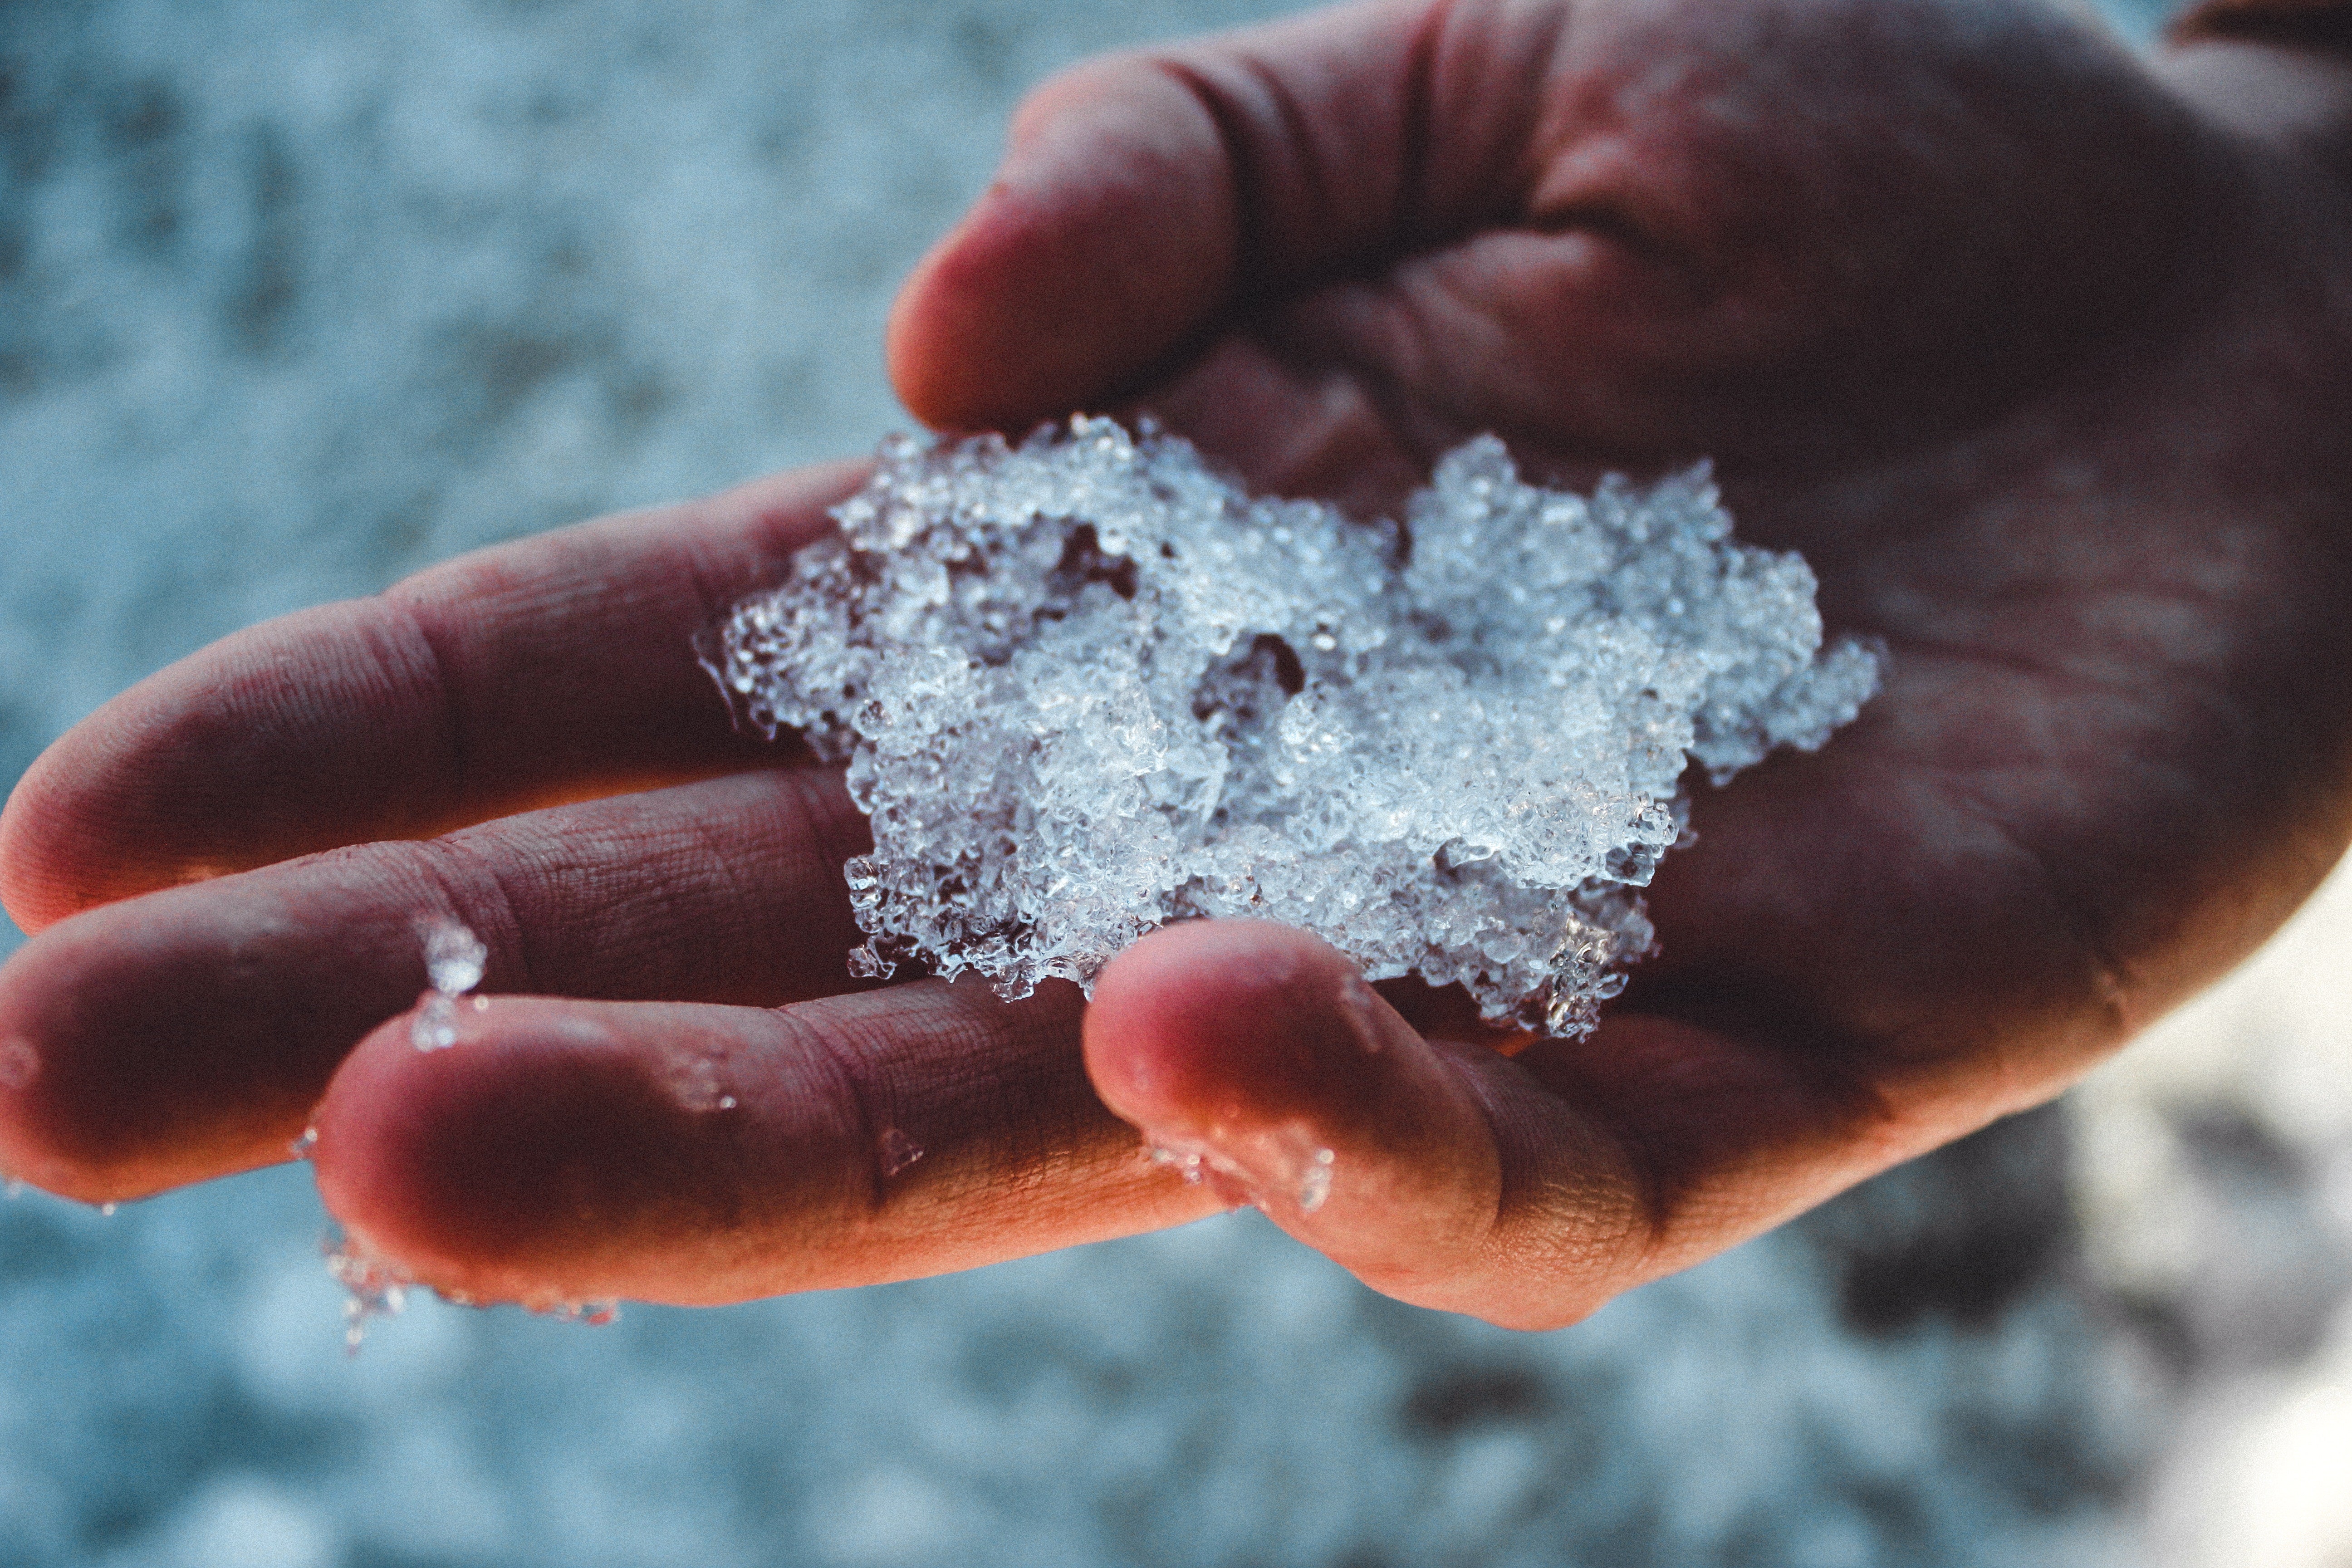 Skin Conditions Caused by Ice: A Guide to Prevention and Treatment